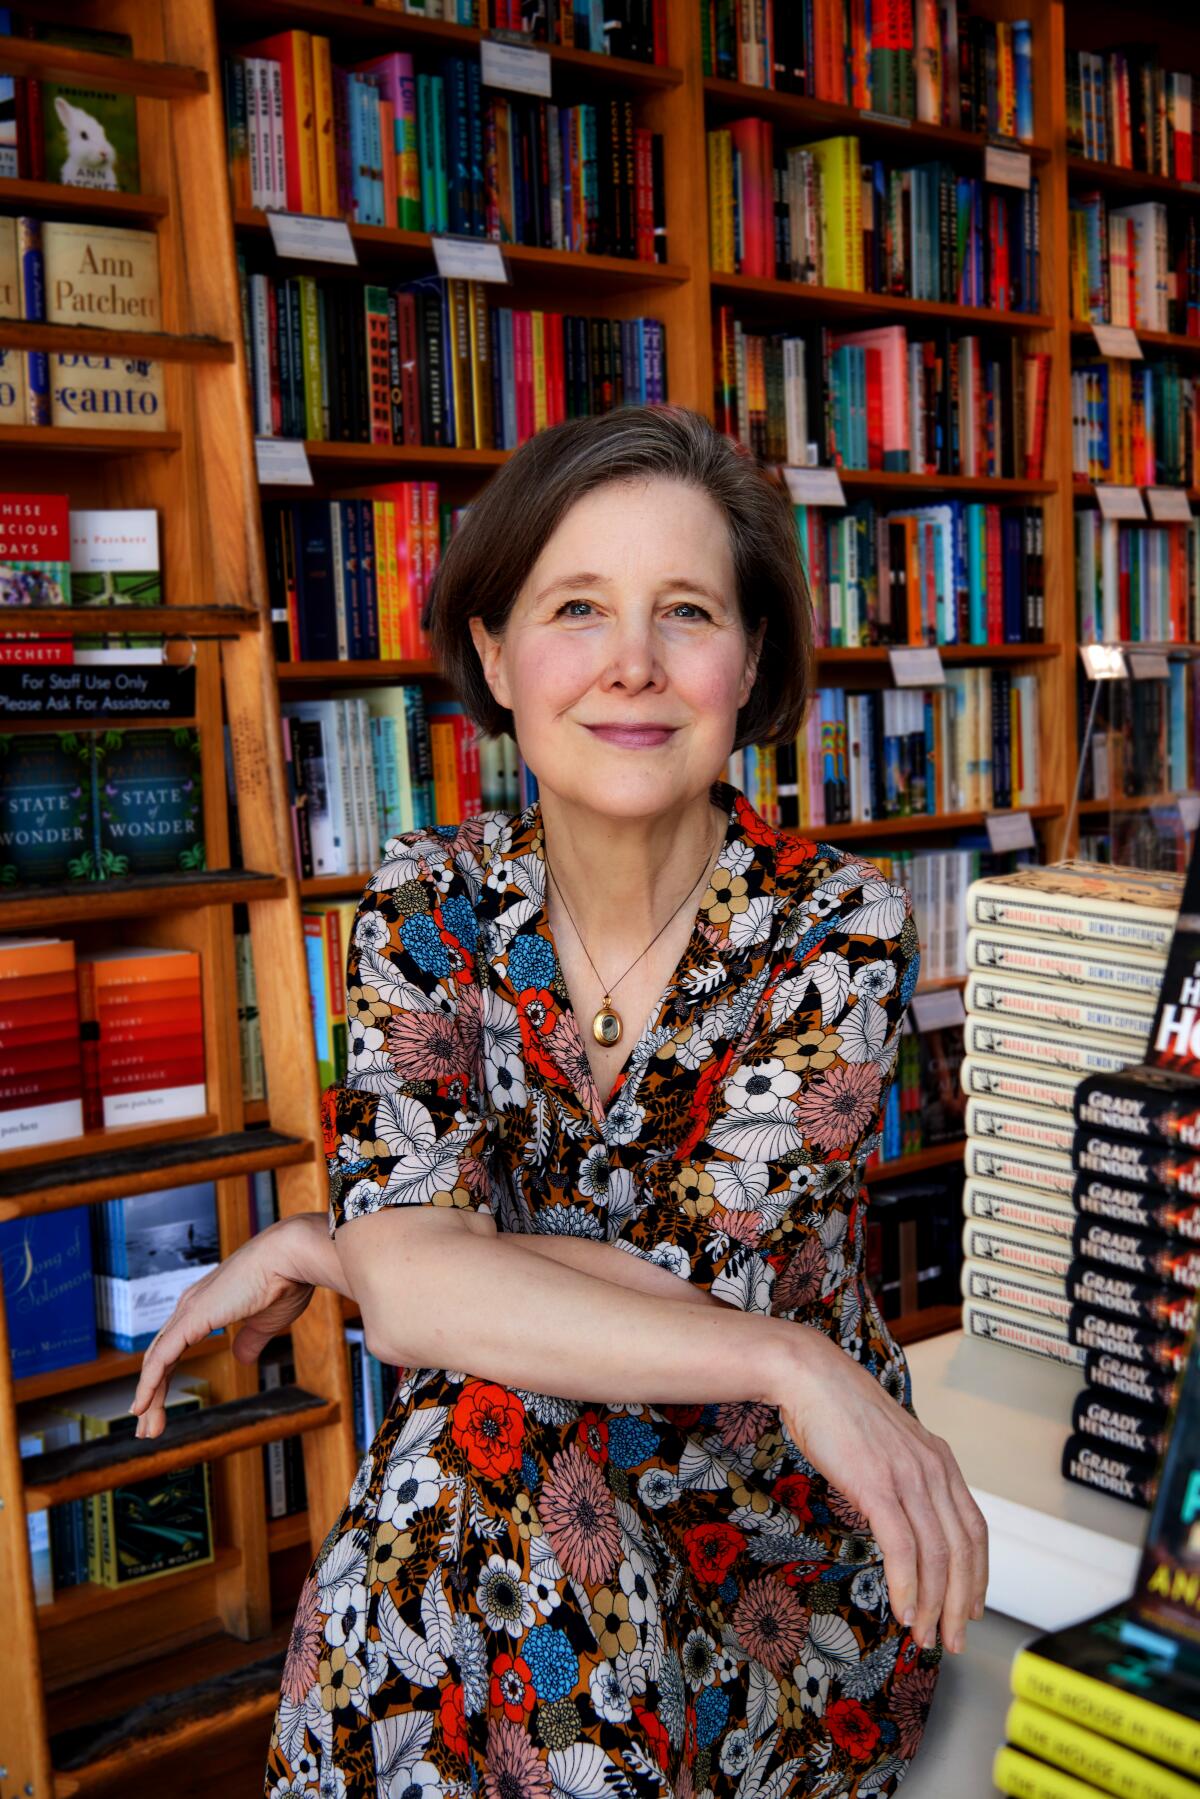 Ann Patchett's ninth novel, "Tom Lake," draws on "Our Town" as well as the Covid pandemic experience.